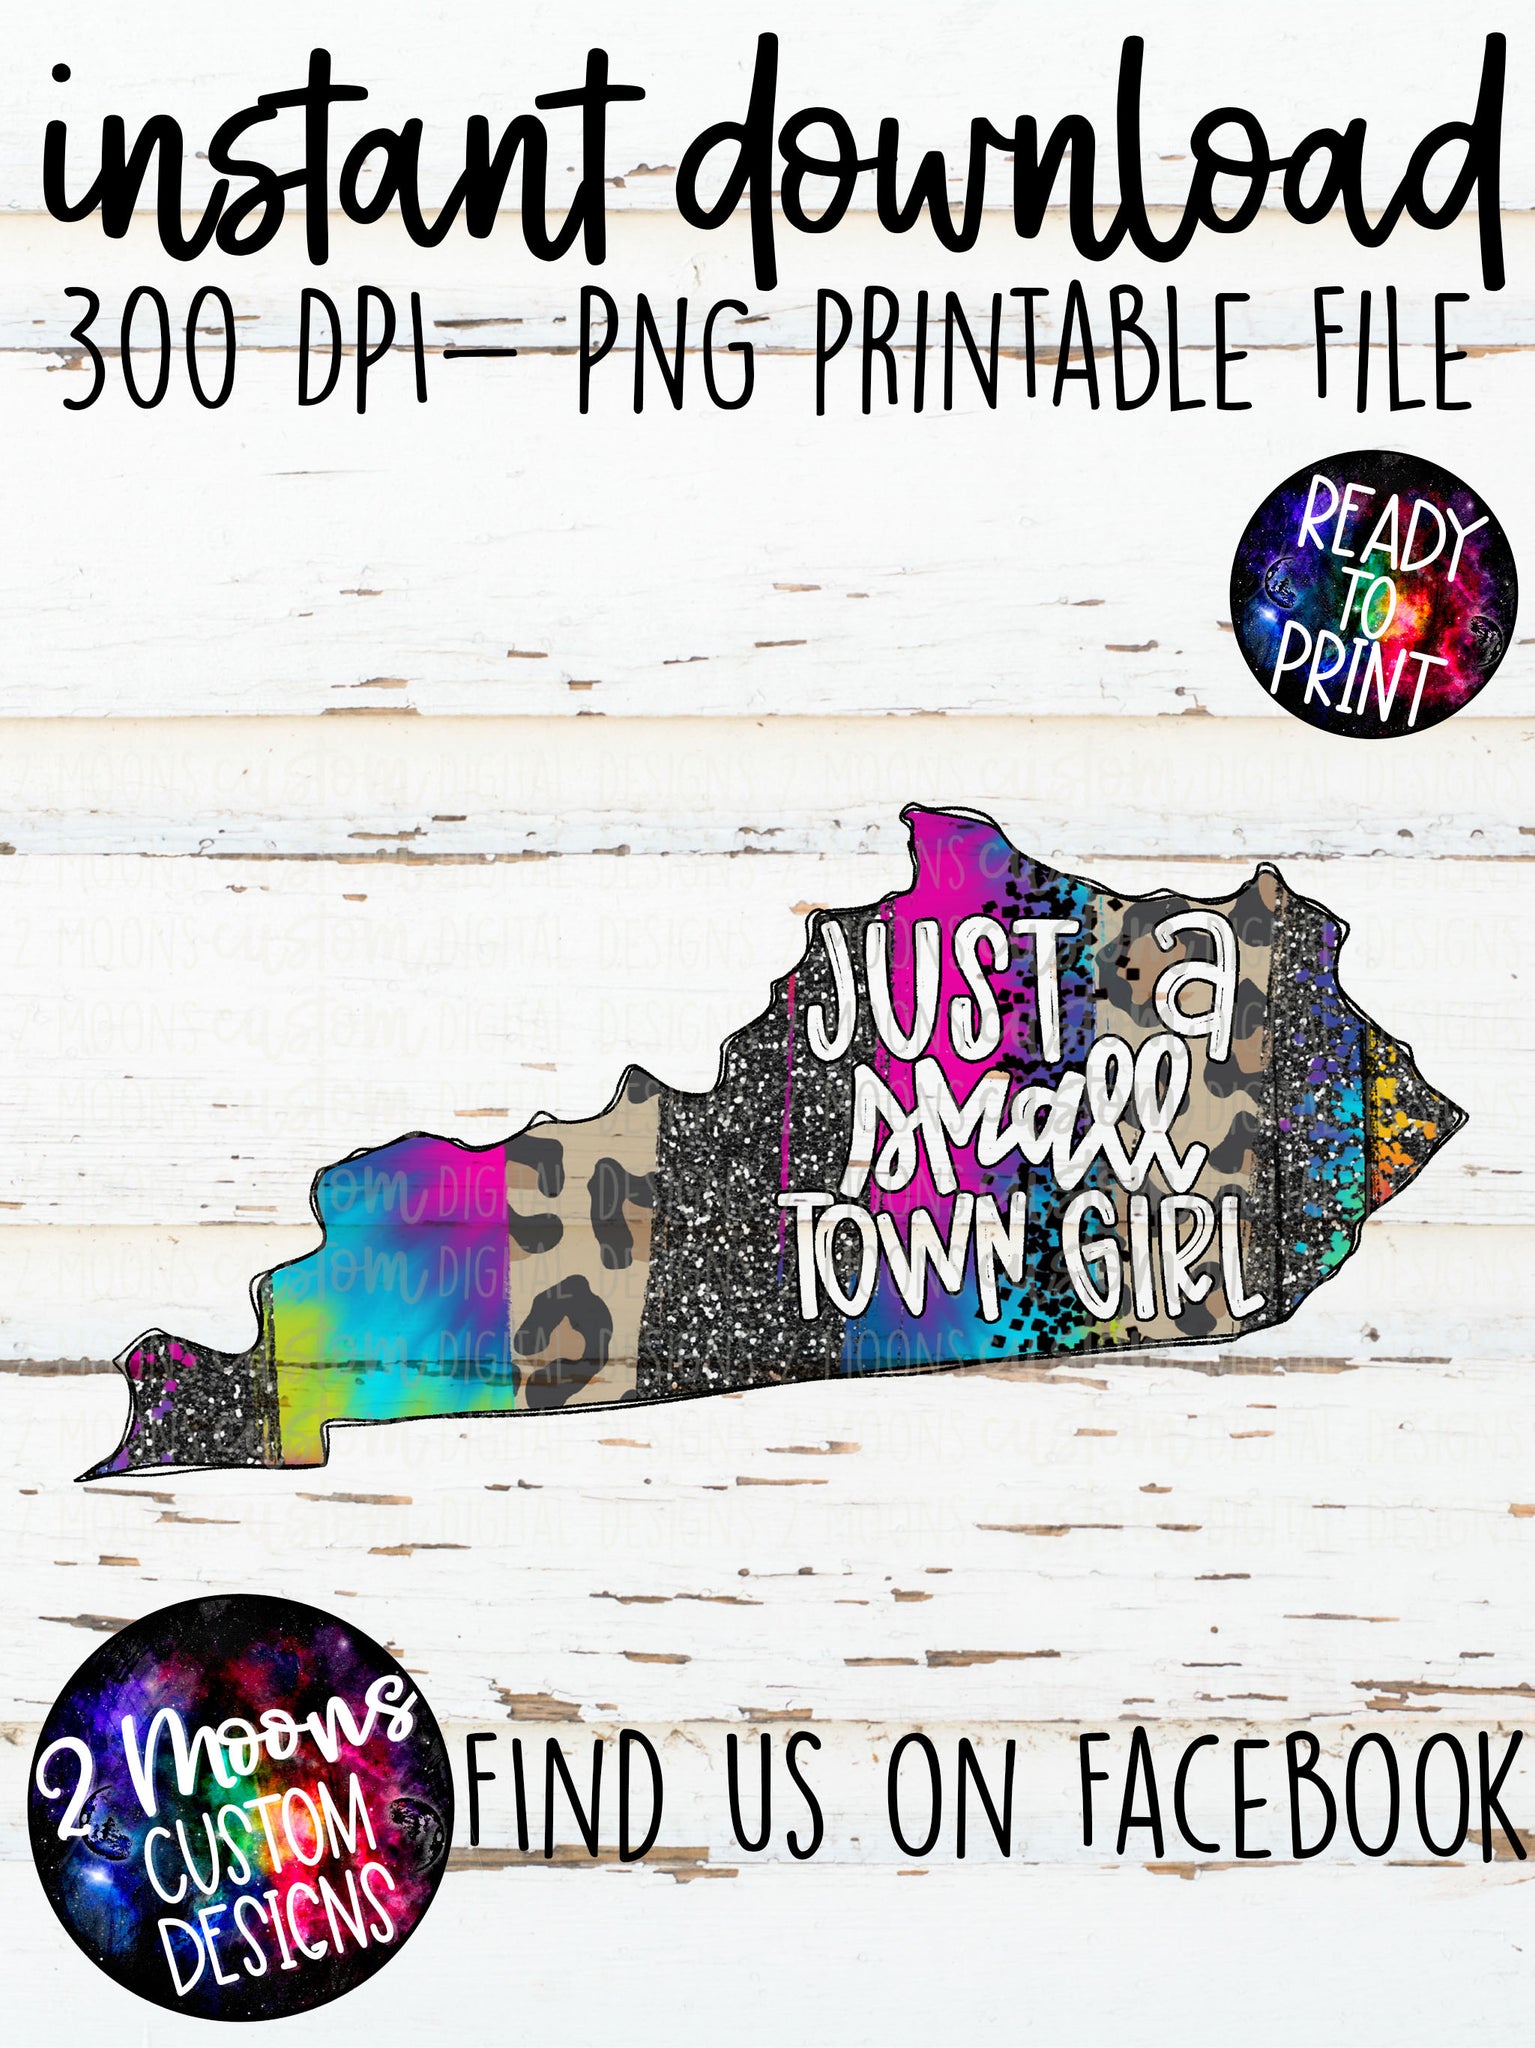 Just A Small Town Girl - Kentucky - State Design